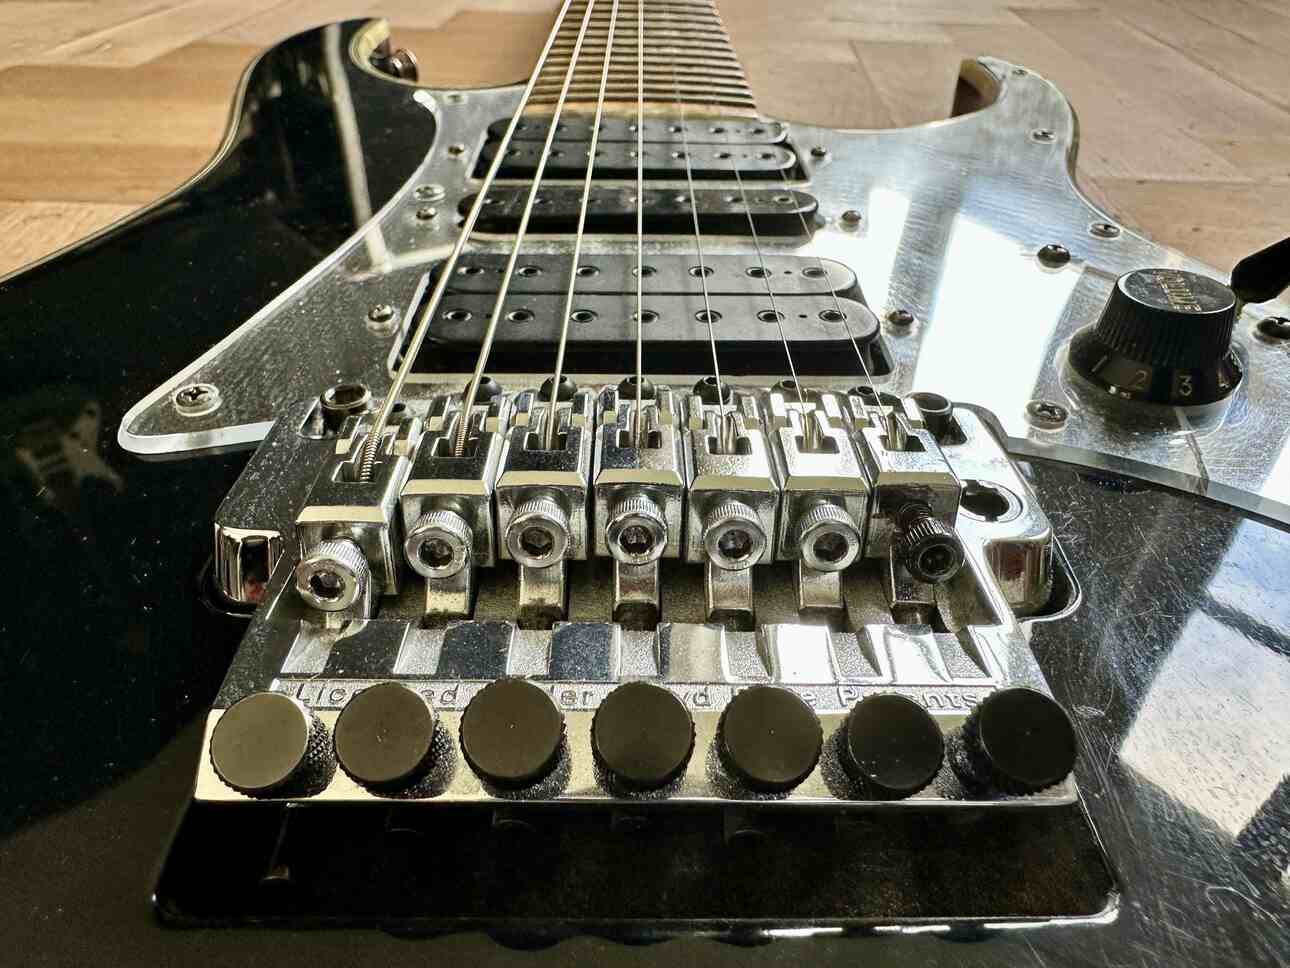 A closeup of a seven string Ibanez Universe BK, seen from behind the bridge.